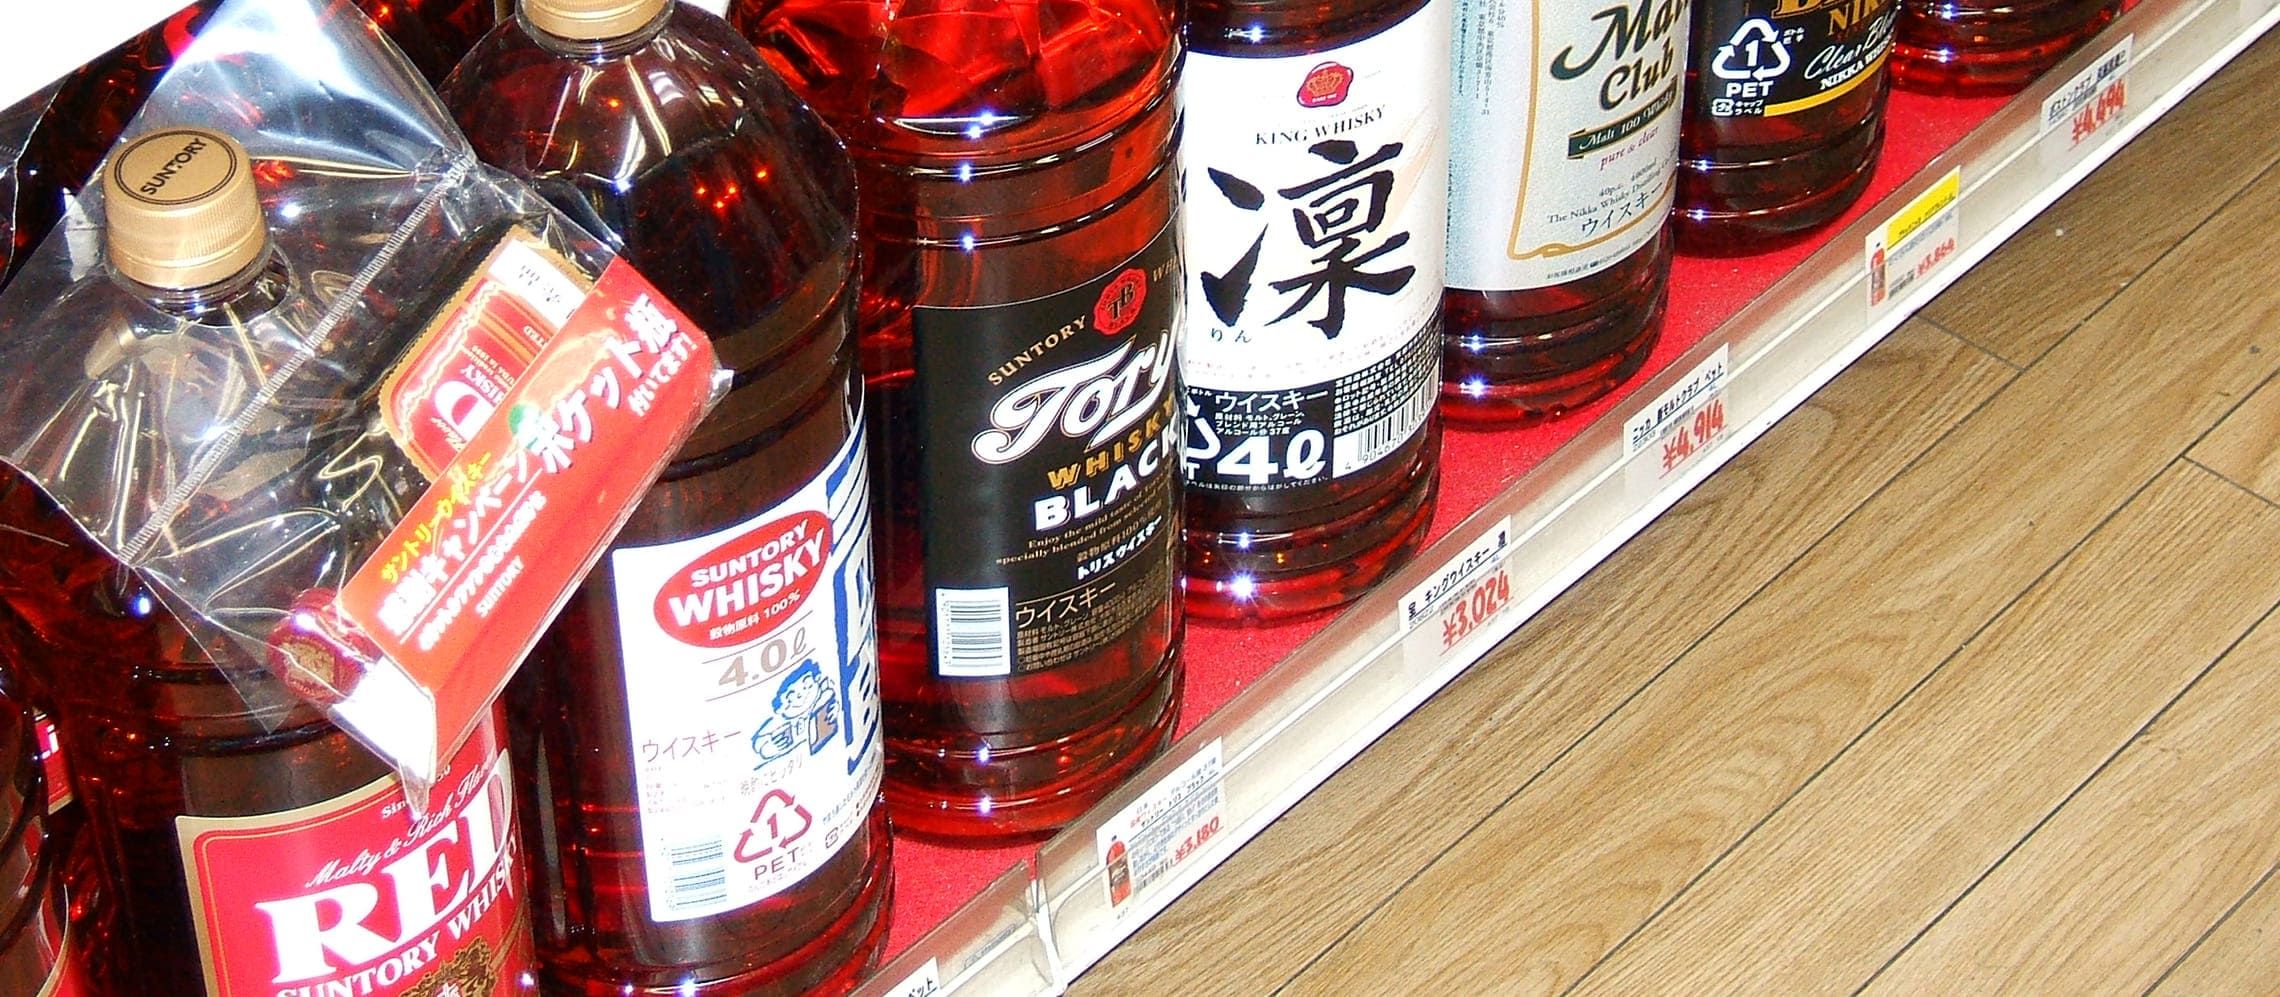 Photo for: 2019 Japan Whisky Market Overview